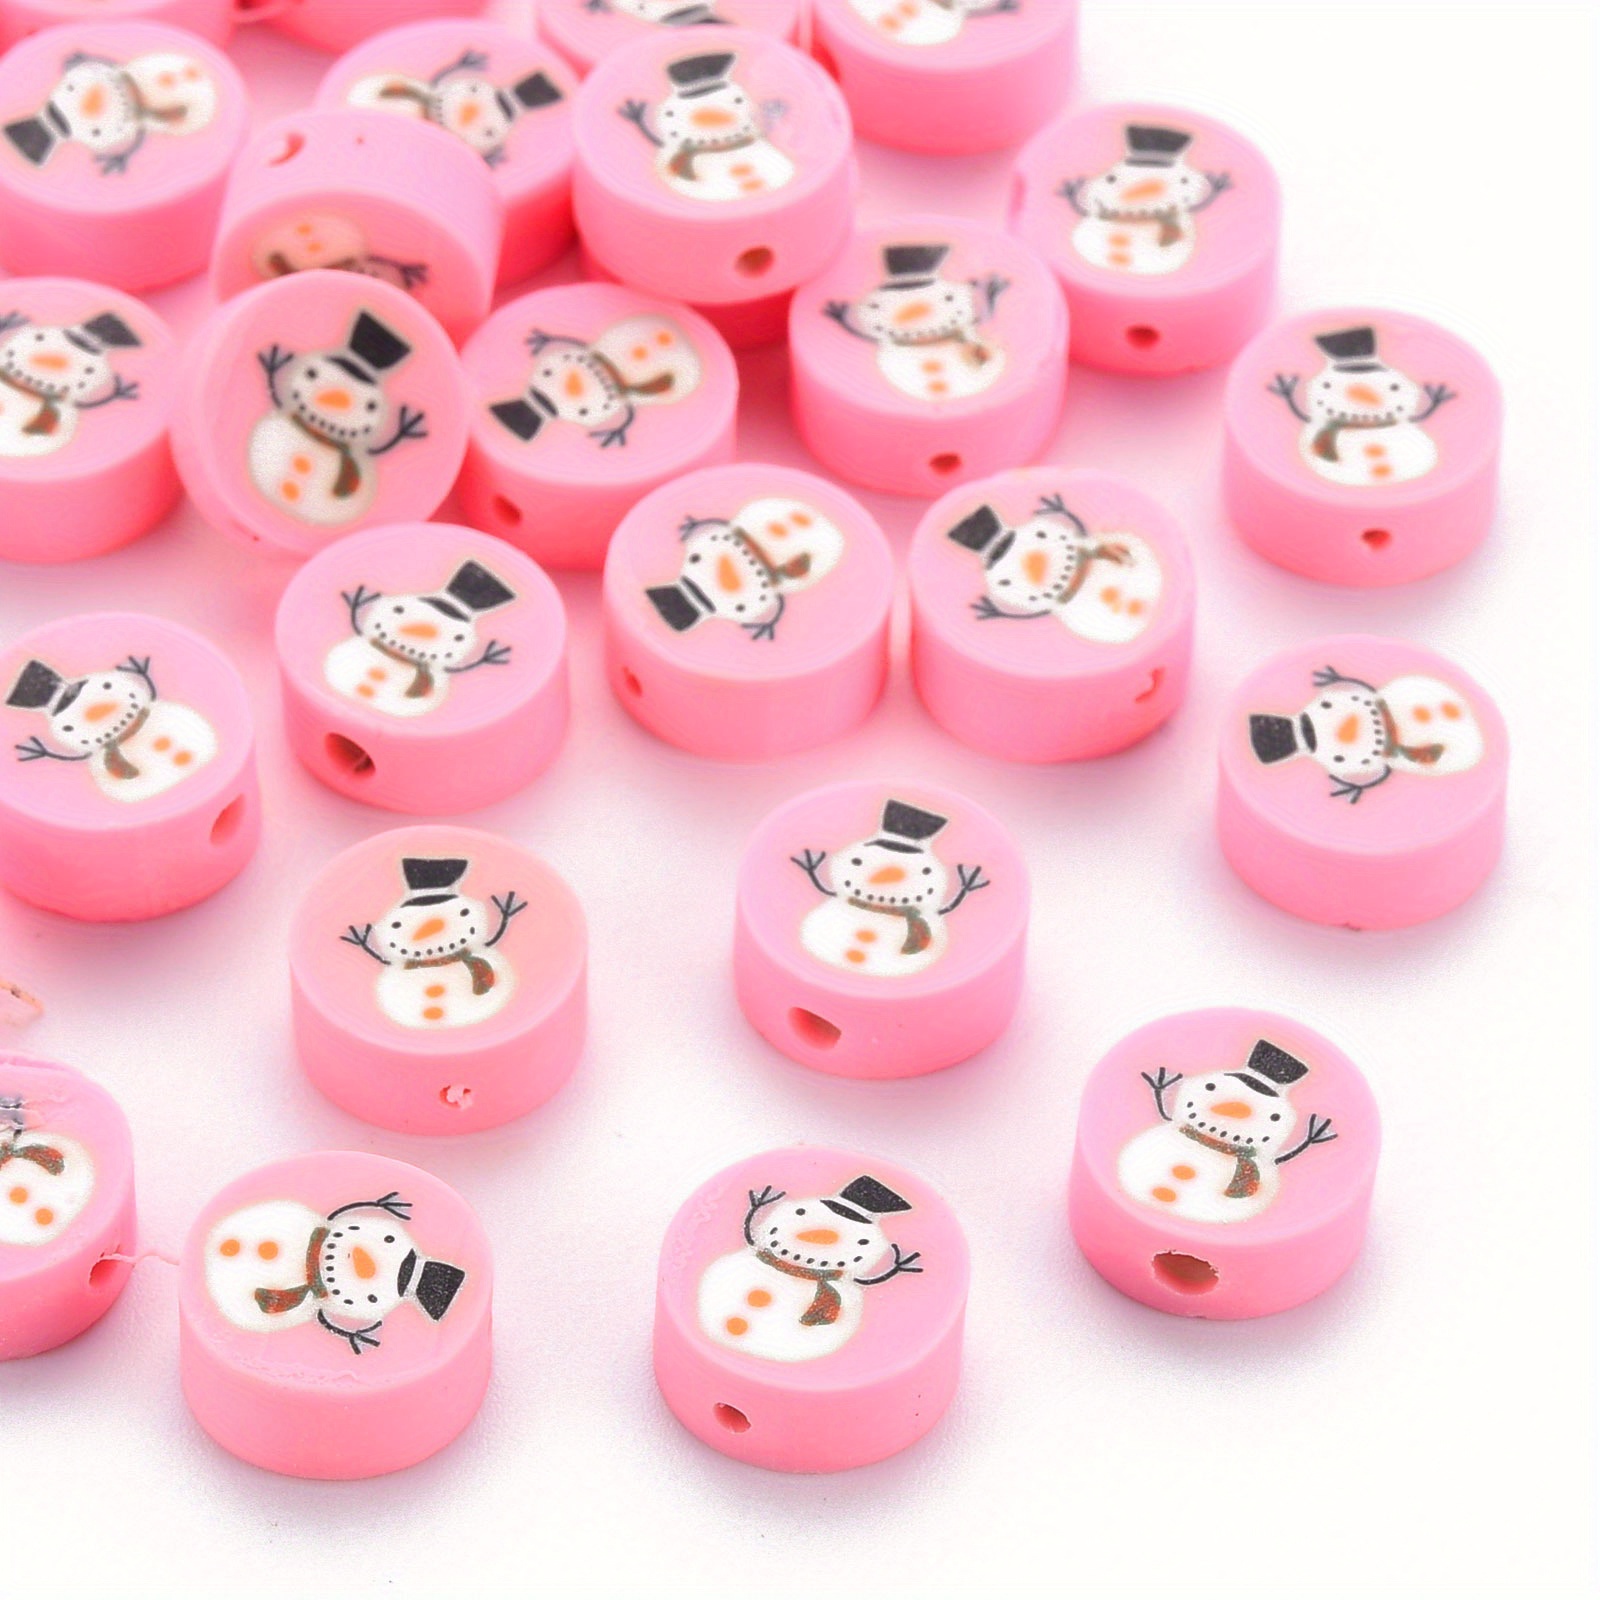 Halcraft Multi Polymer Clay Round 12mm Beads - 40 Pieces - for Jewelry Making